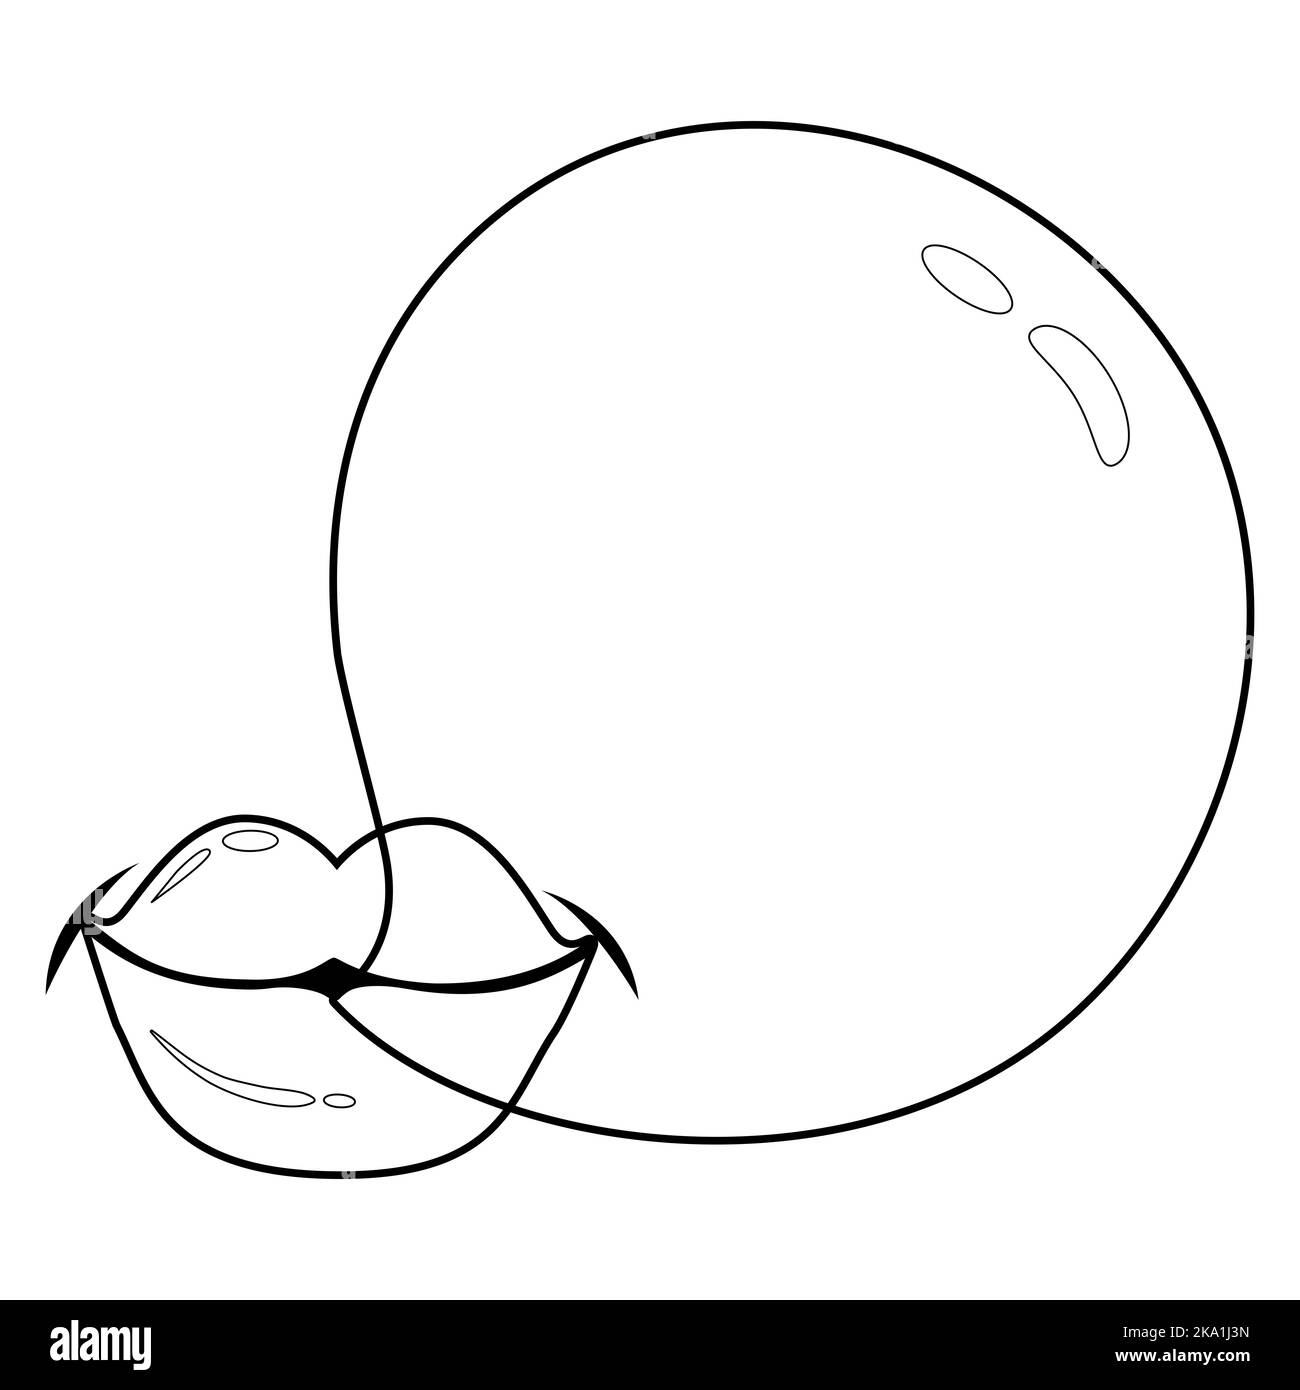 A mouth blowing a bubblegum bubble. Black and white coloring page Stock Photo